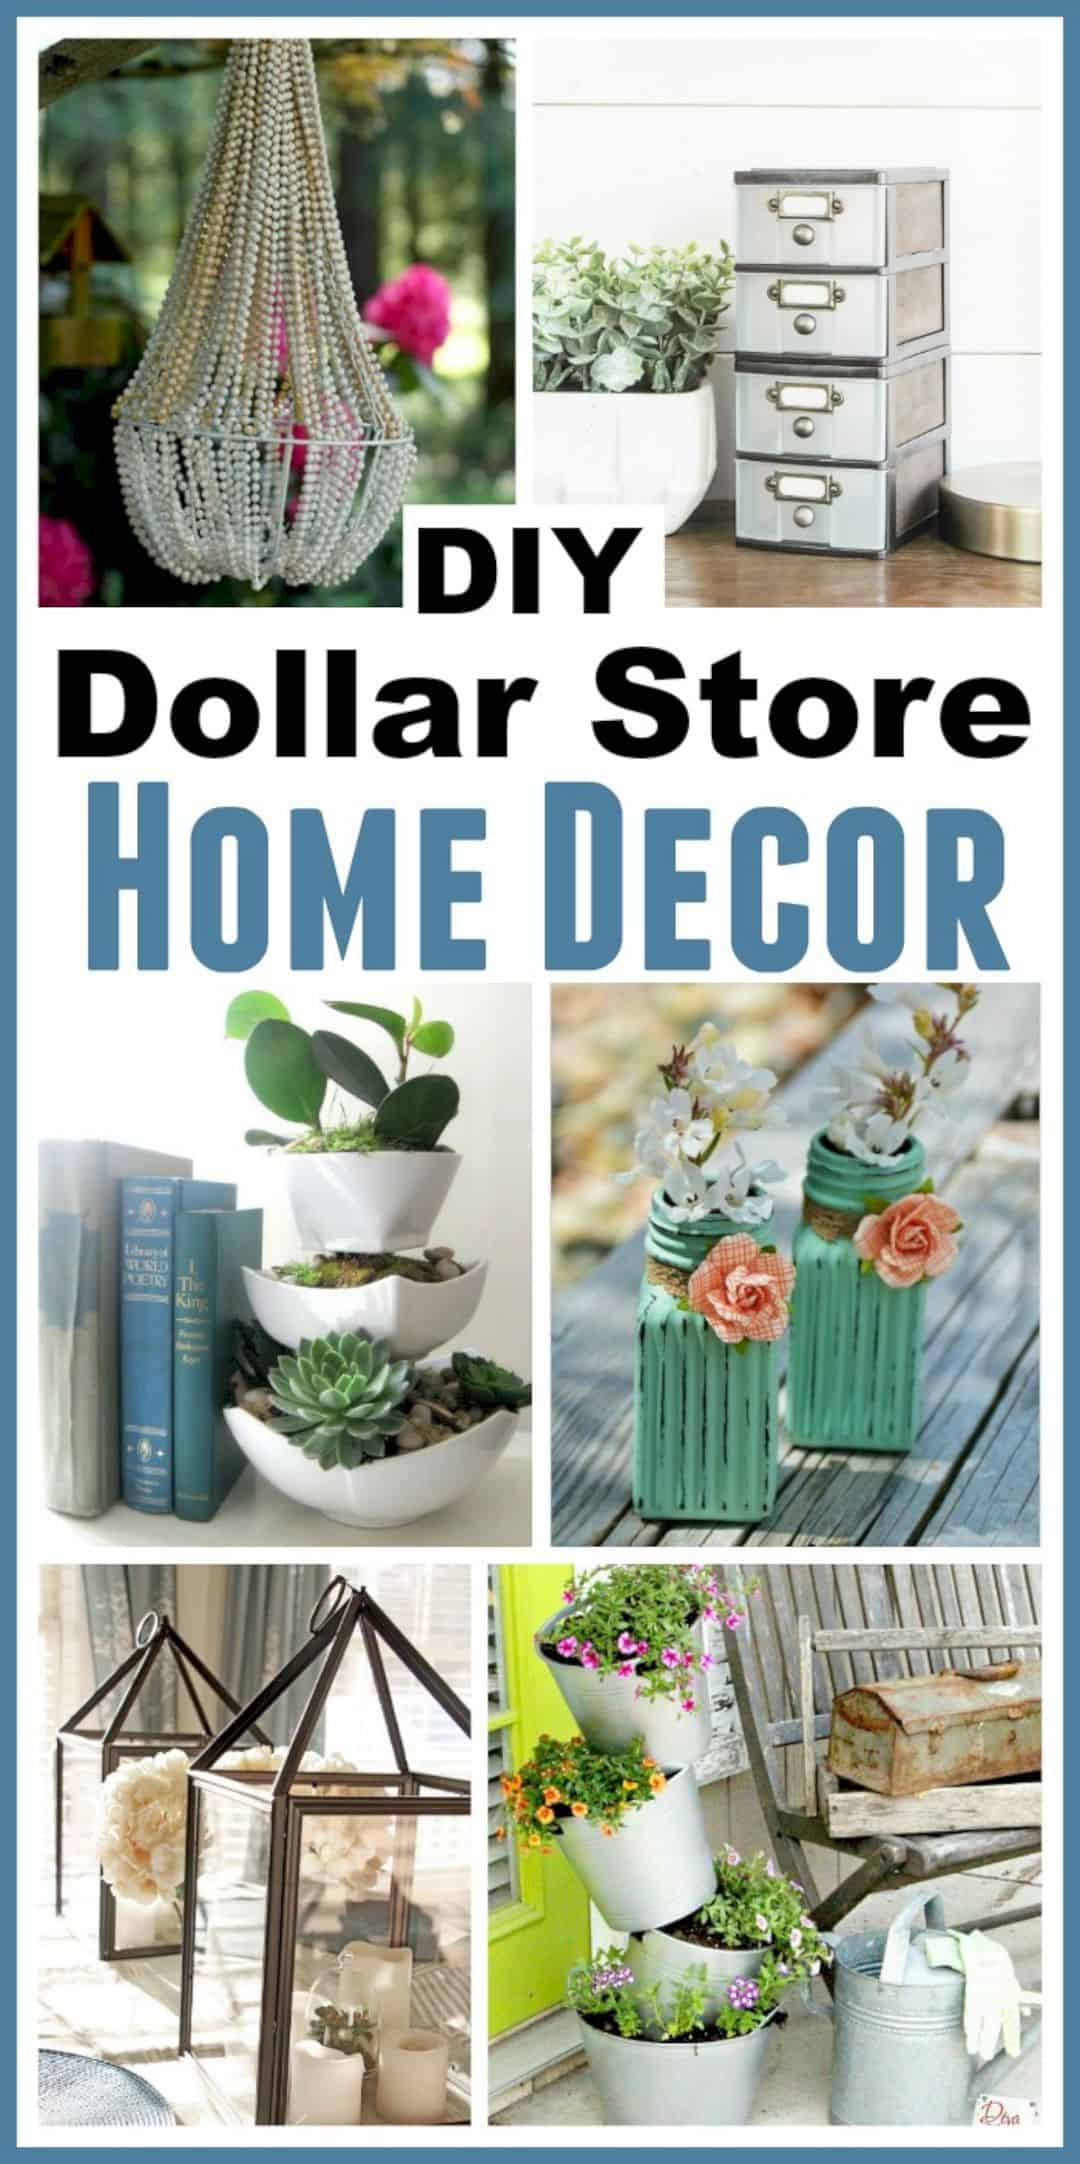 Easy DIY Home Decorating
 These 12 Bud Friendly DIY Home Decor Projects Are Worth